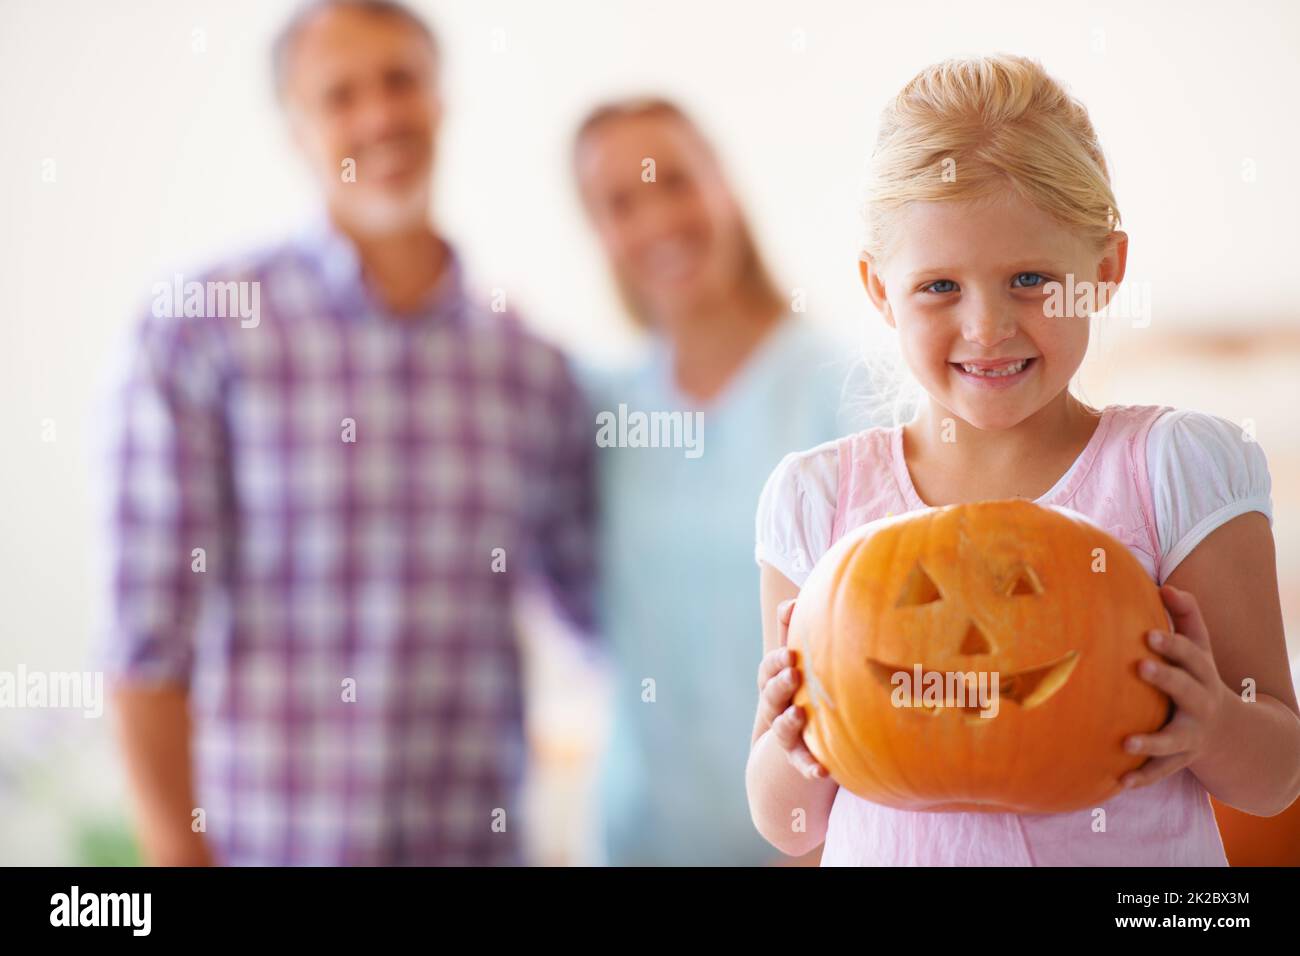 Proud of her jack-o-lantern. Portrait of a little girl holding her jack-o-lantern with her parents blurred behind her. Stock Photo